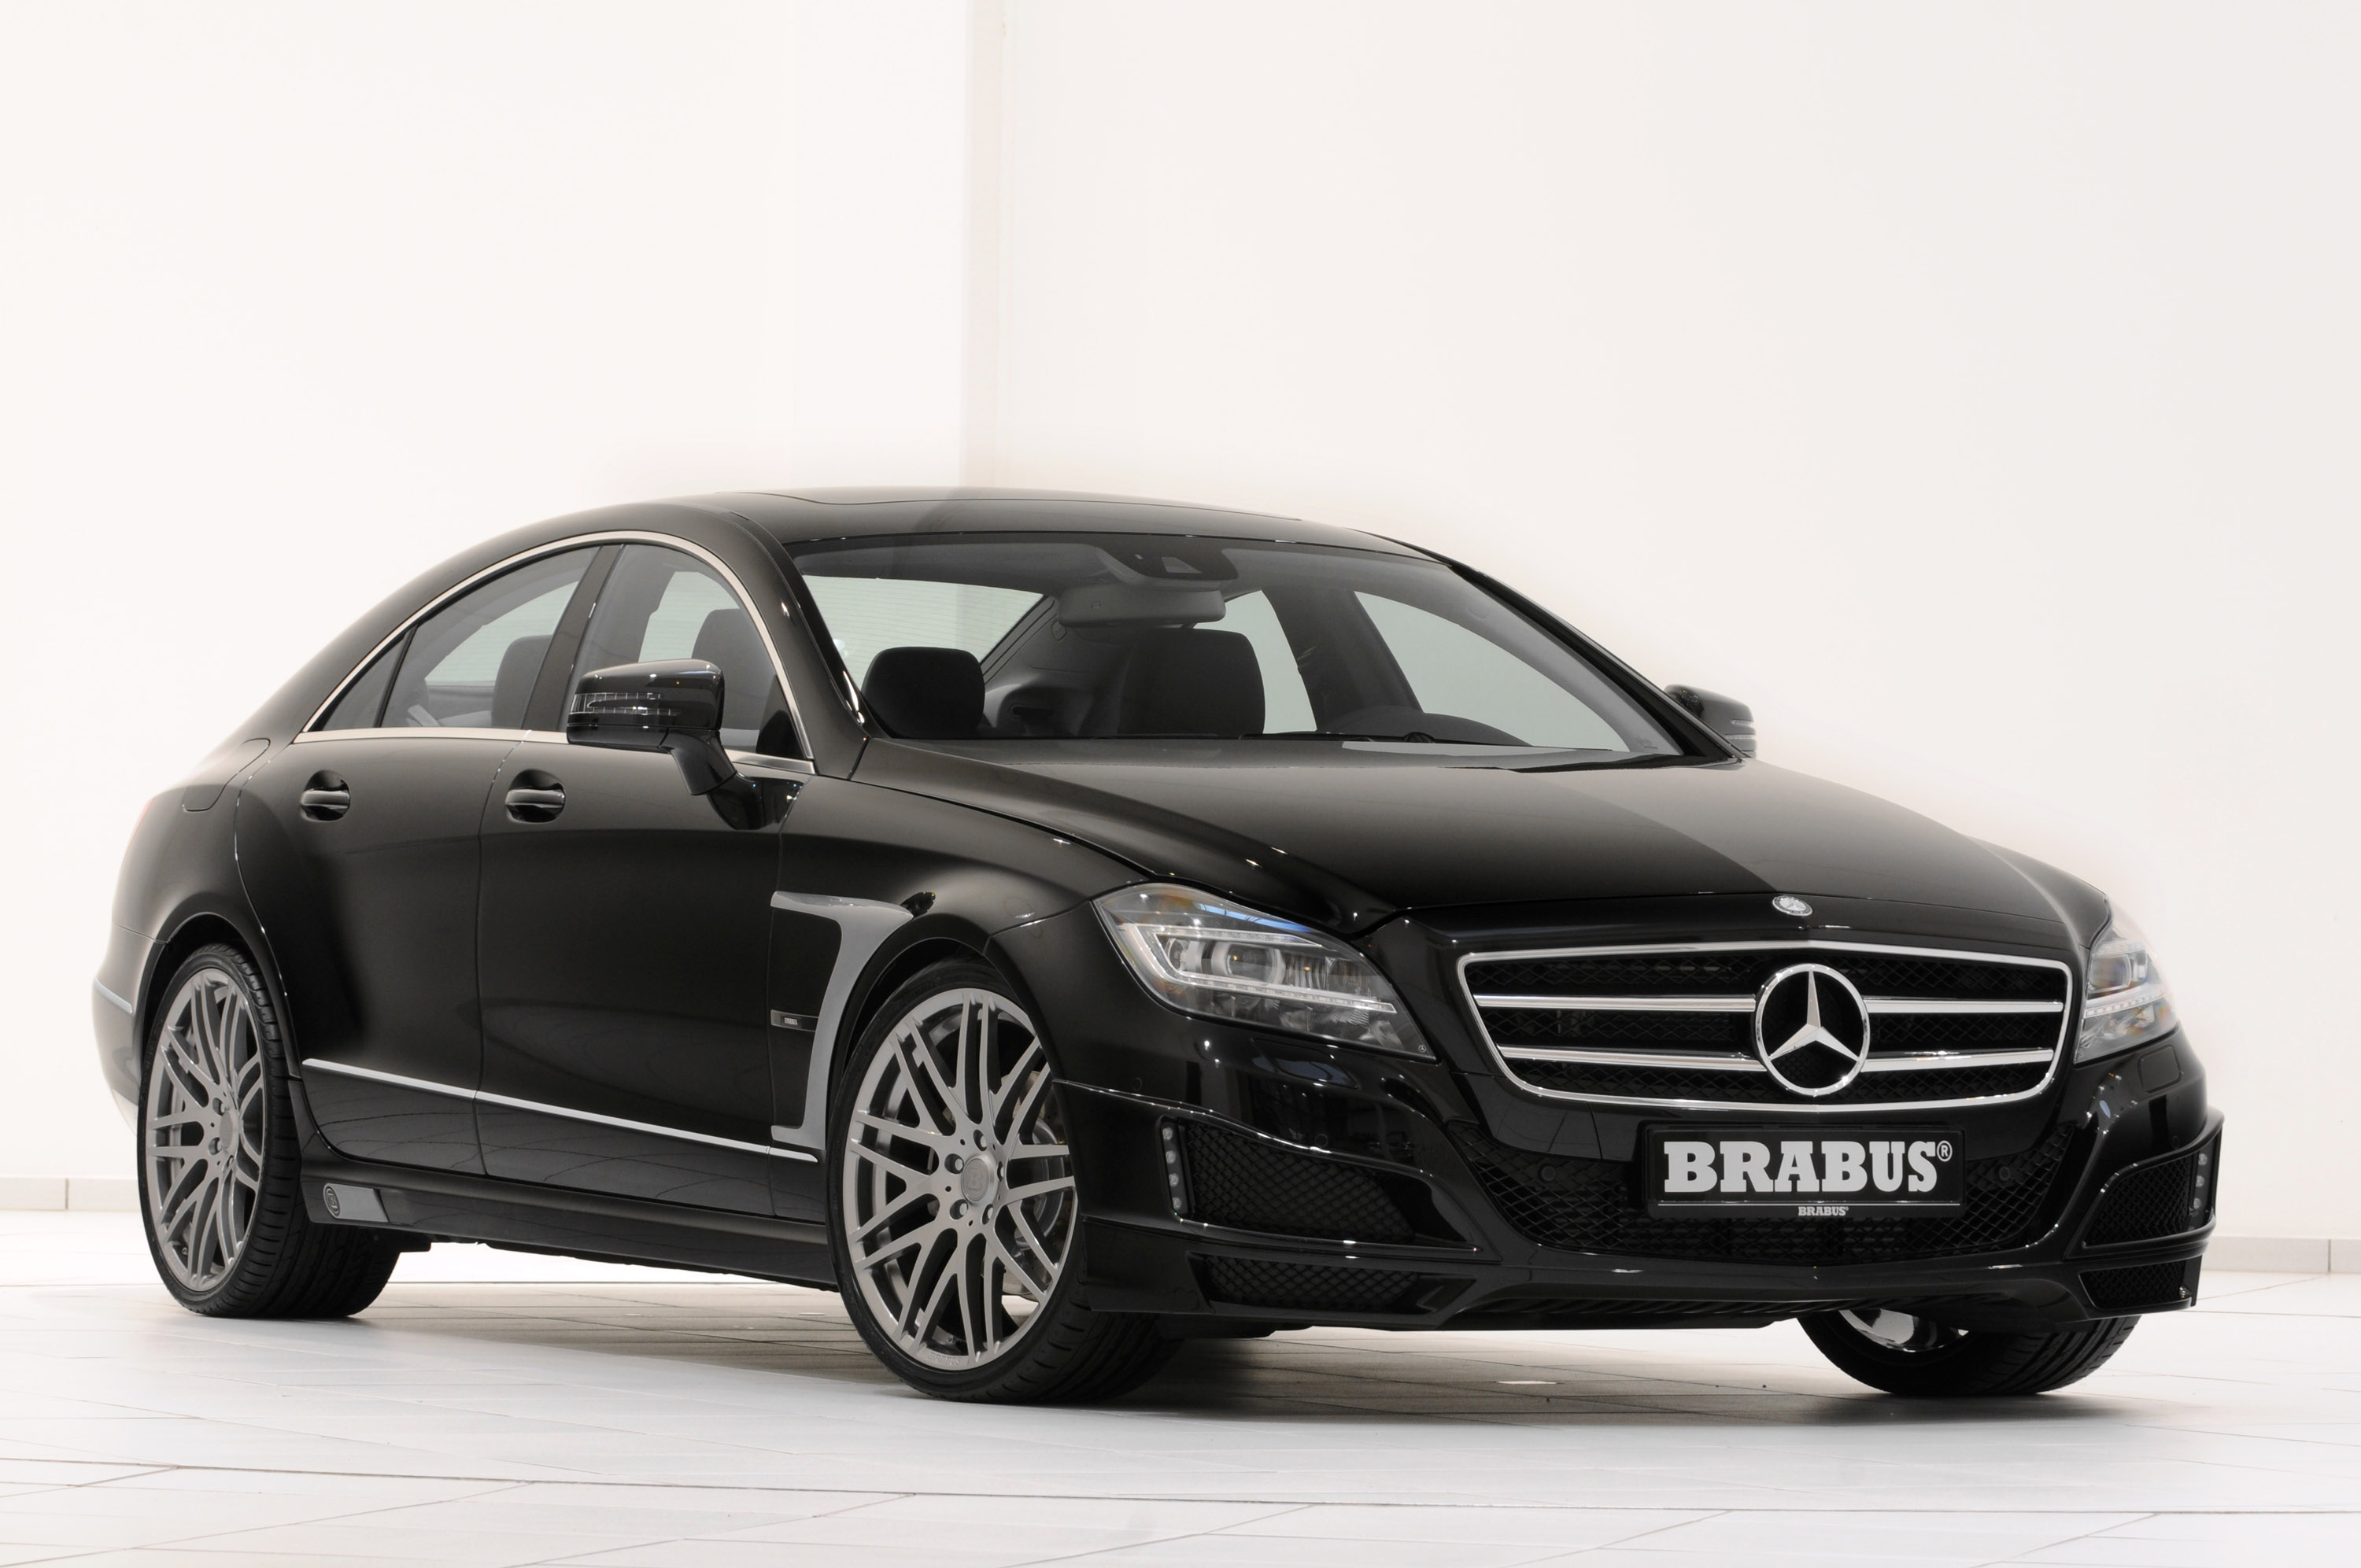 Brabus Mercedes-Benz CLS Coupe photo #1